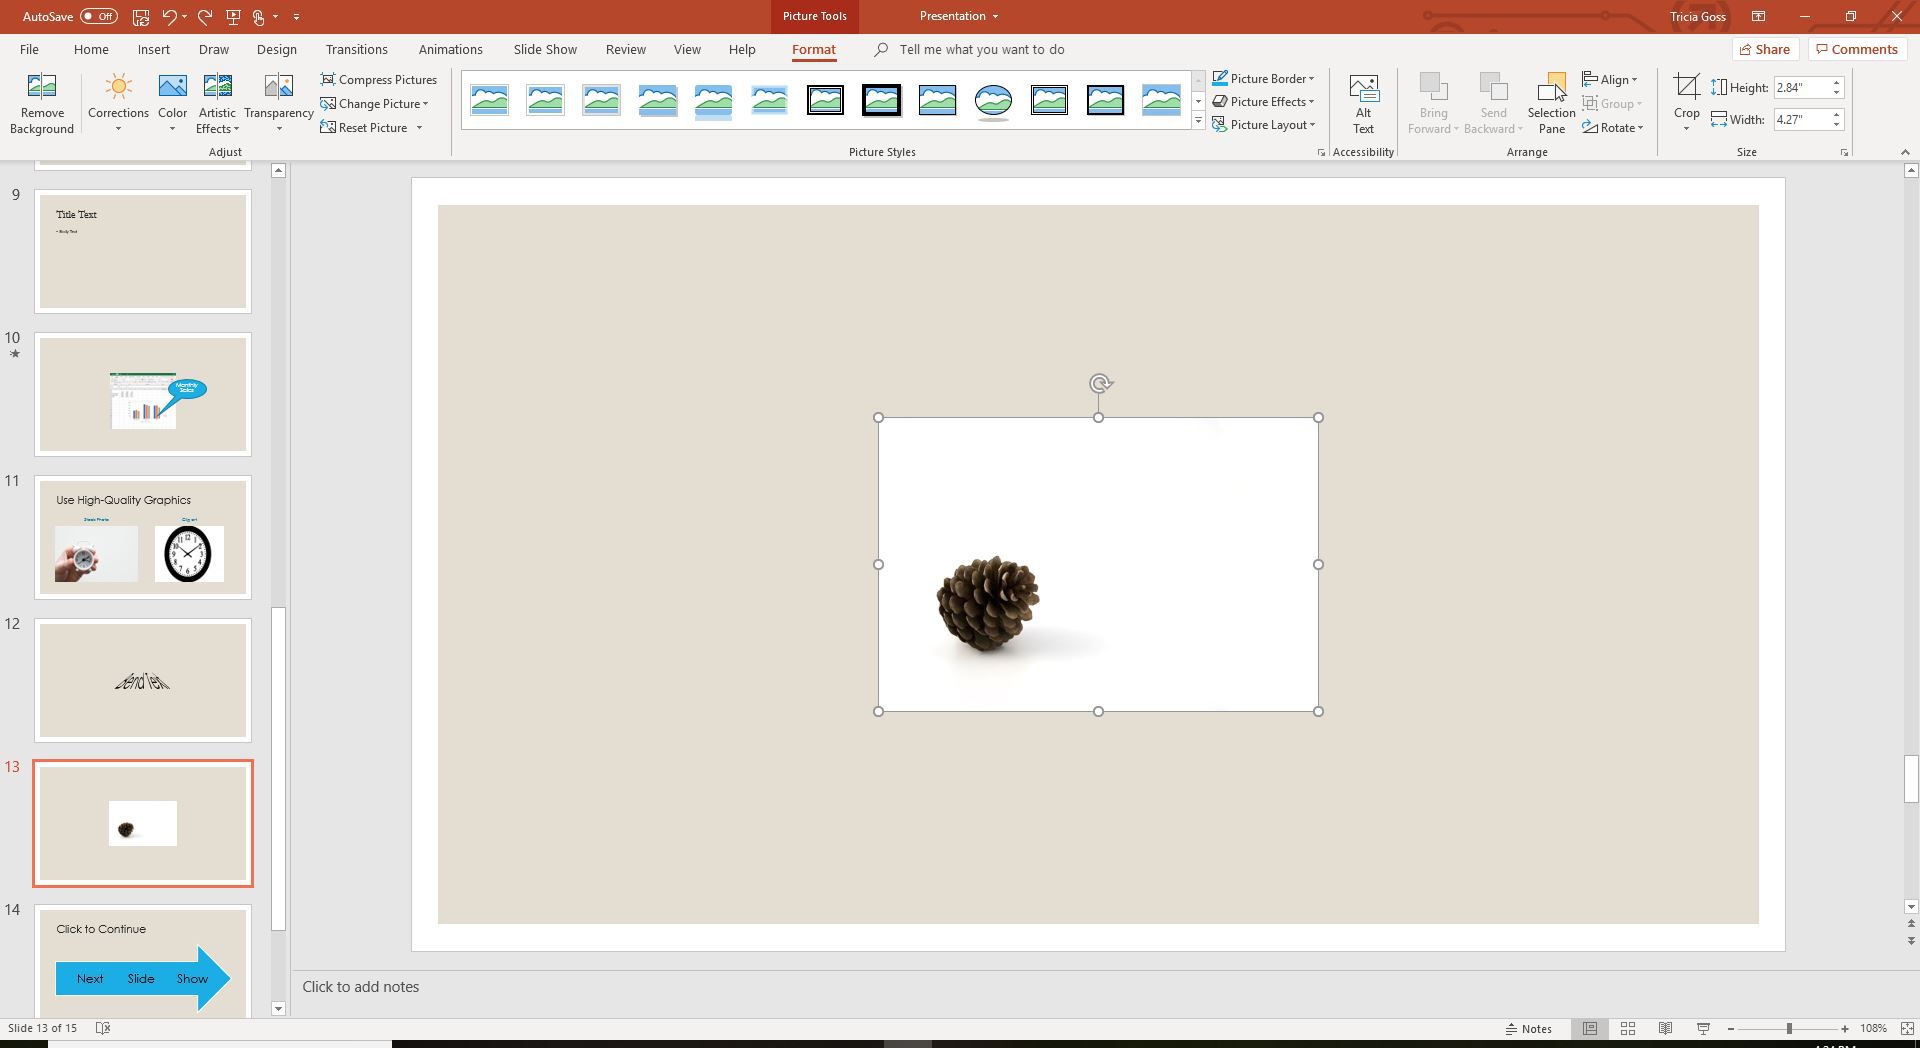 How To Make An Image Background Transparent In Powerpoint